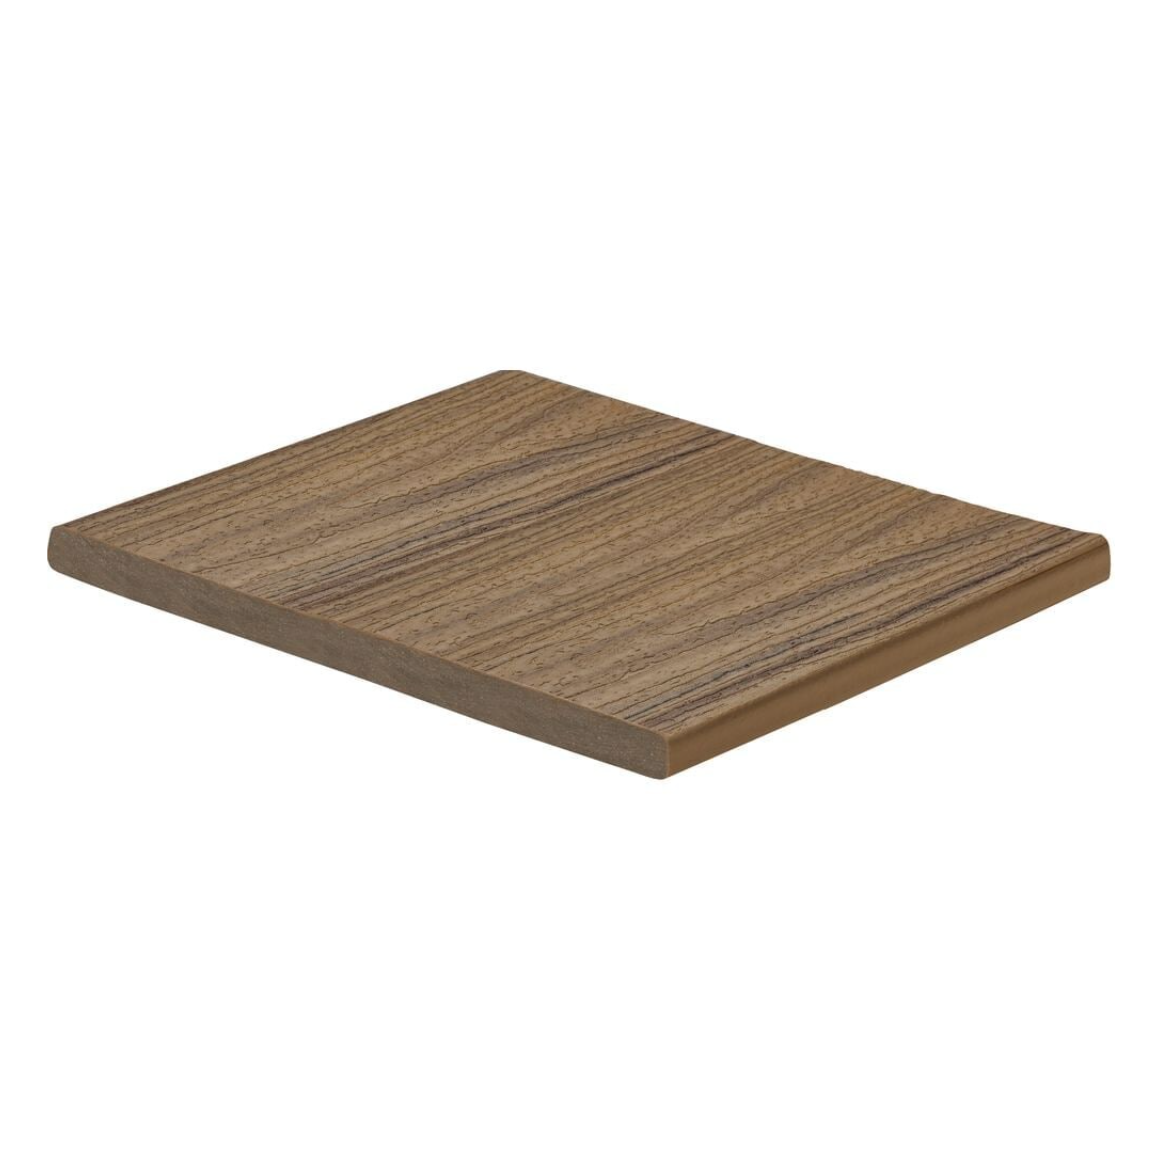 Trex Enhance Naturals Fascia Board Toasted Sand 1 in x 12 in x 12 ft